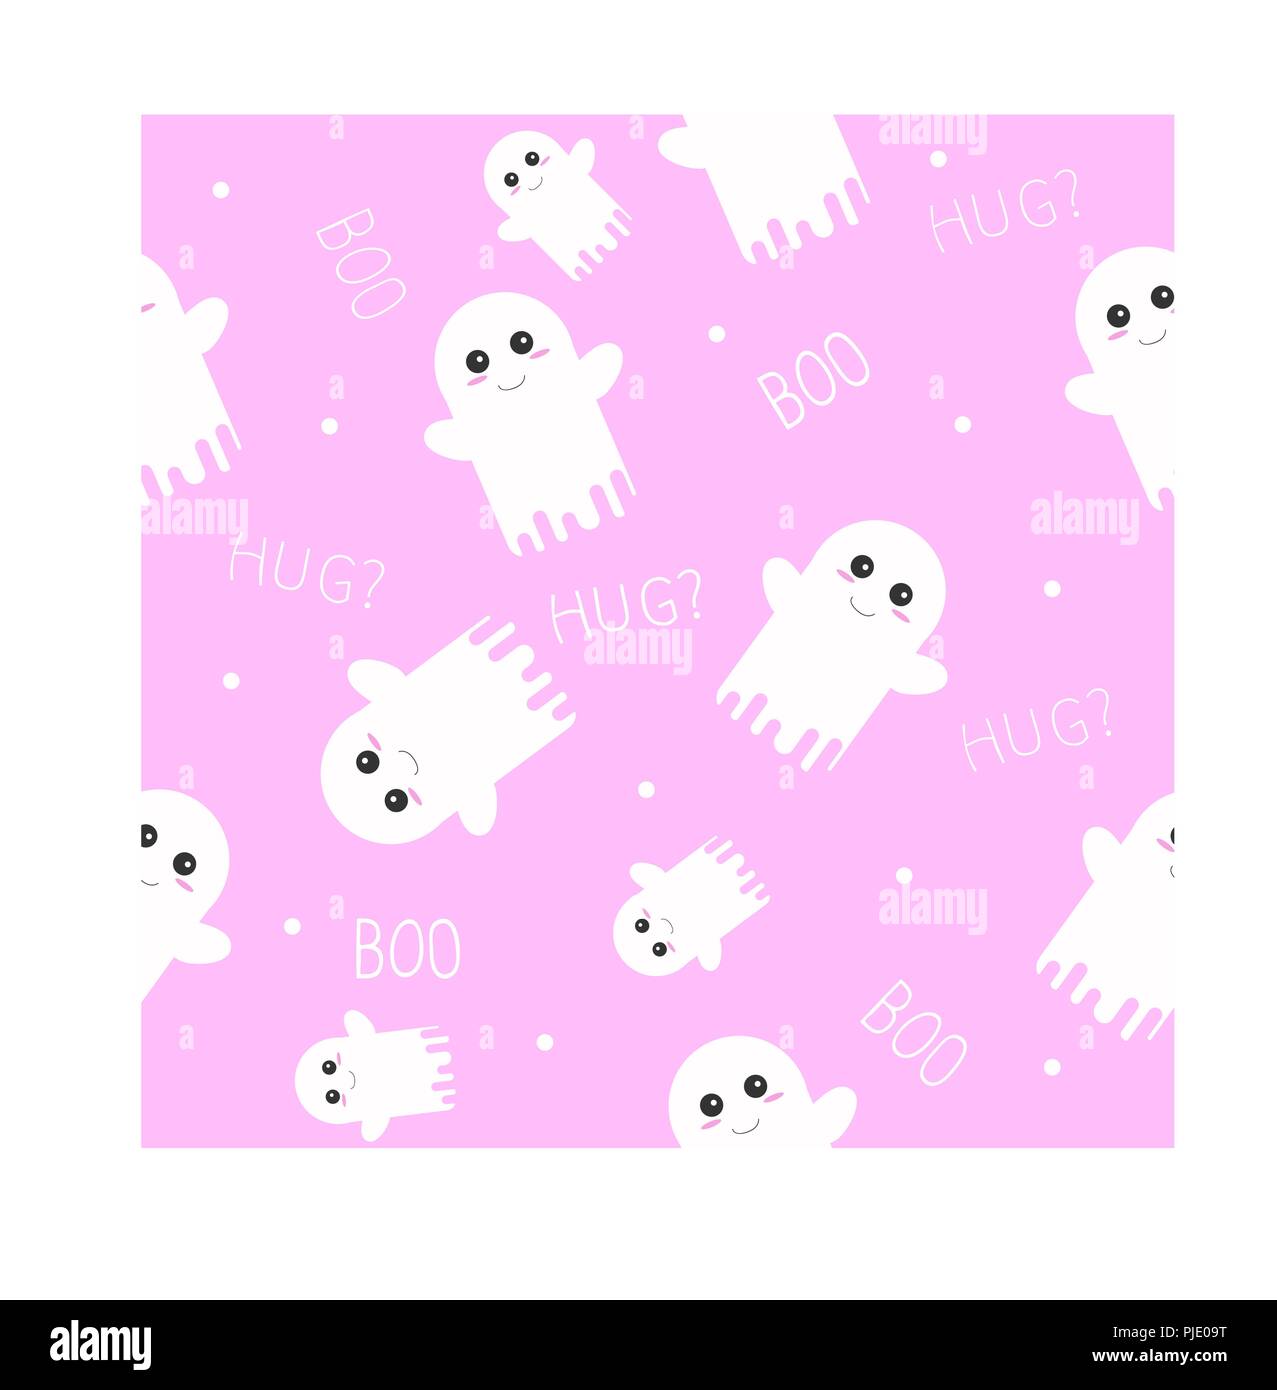 Cute Ghost Halloween Seamless Pattern with Boo and Hug Texts. Stock Vector